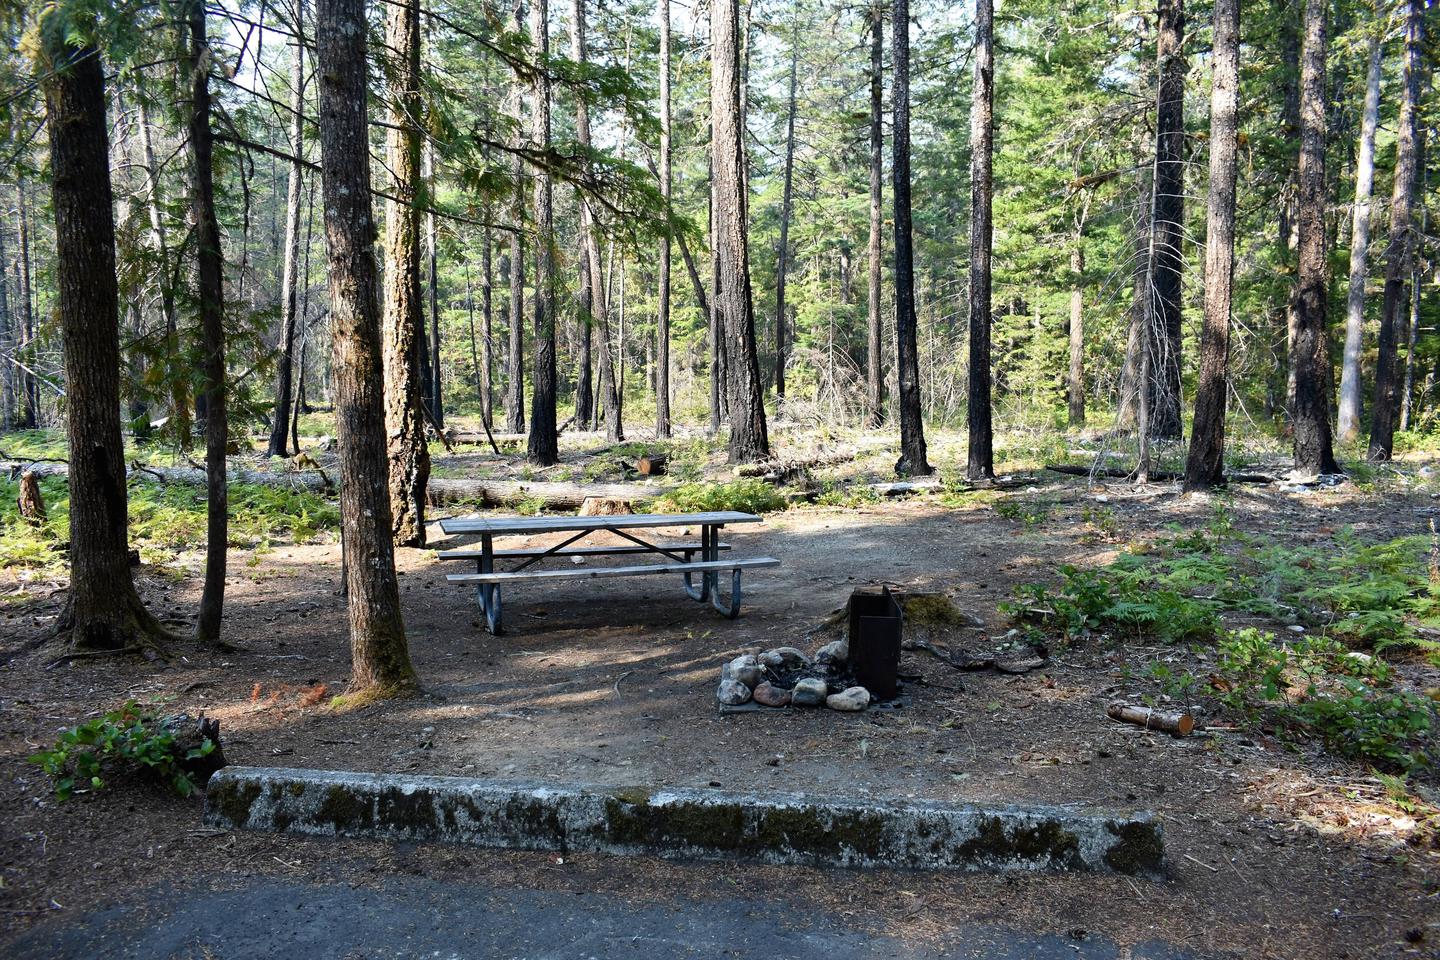 Picnic table, tent area, and fire ringView of campsite